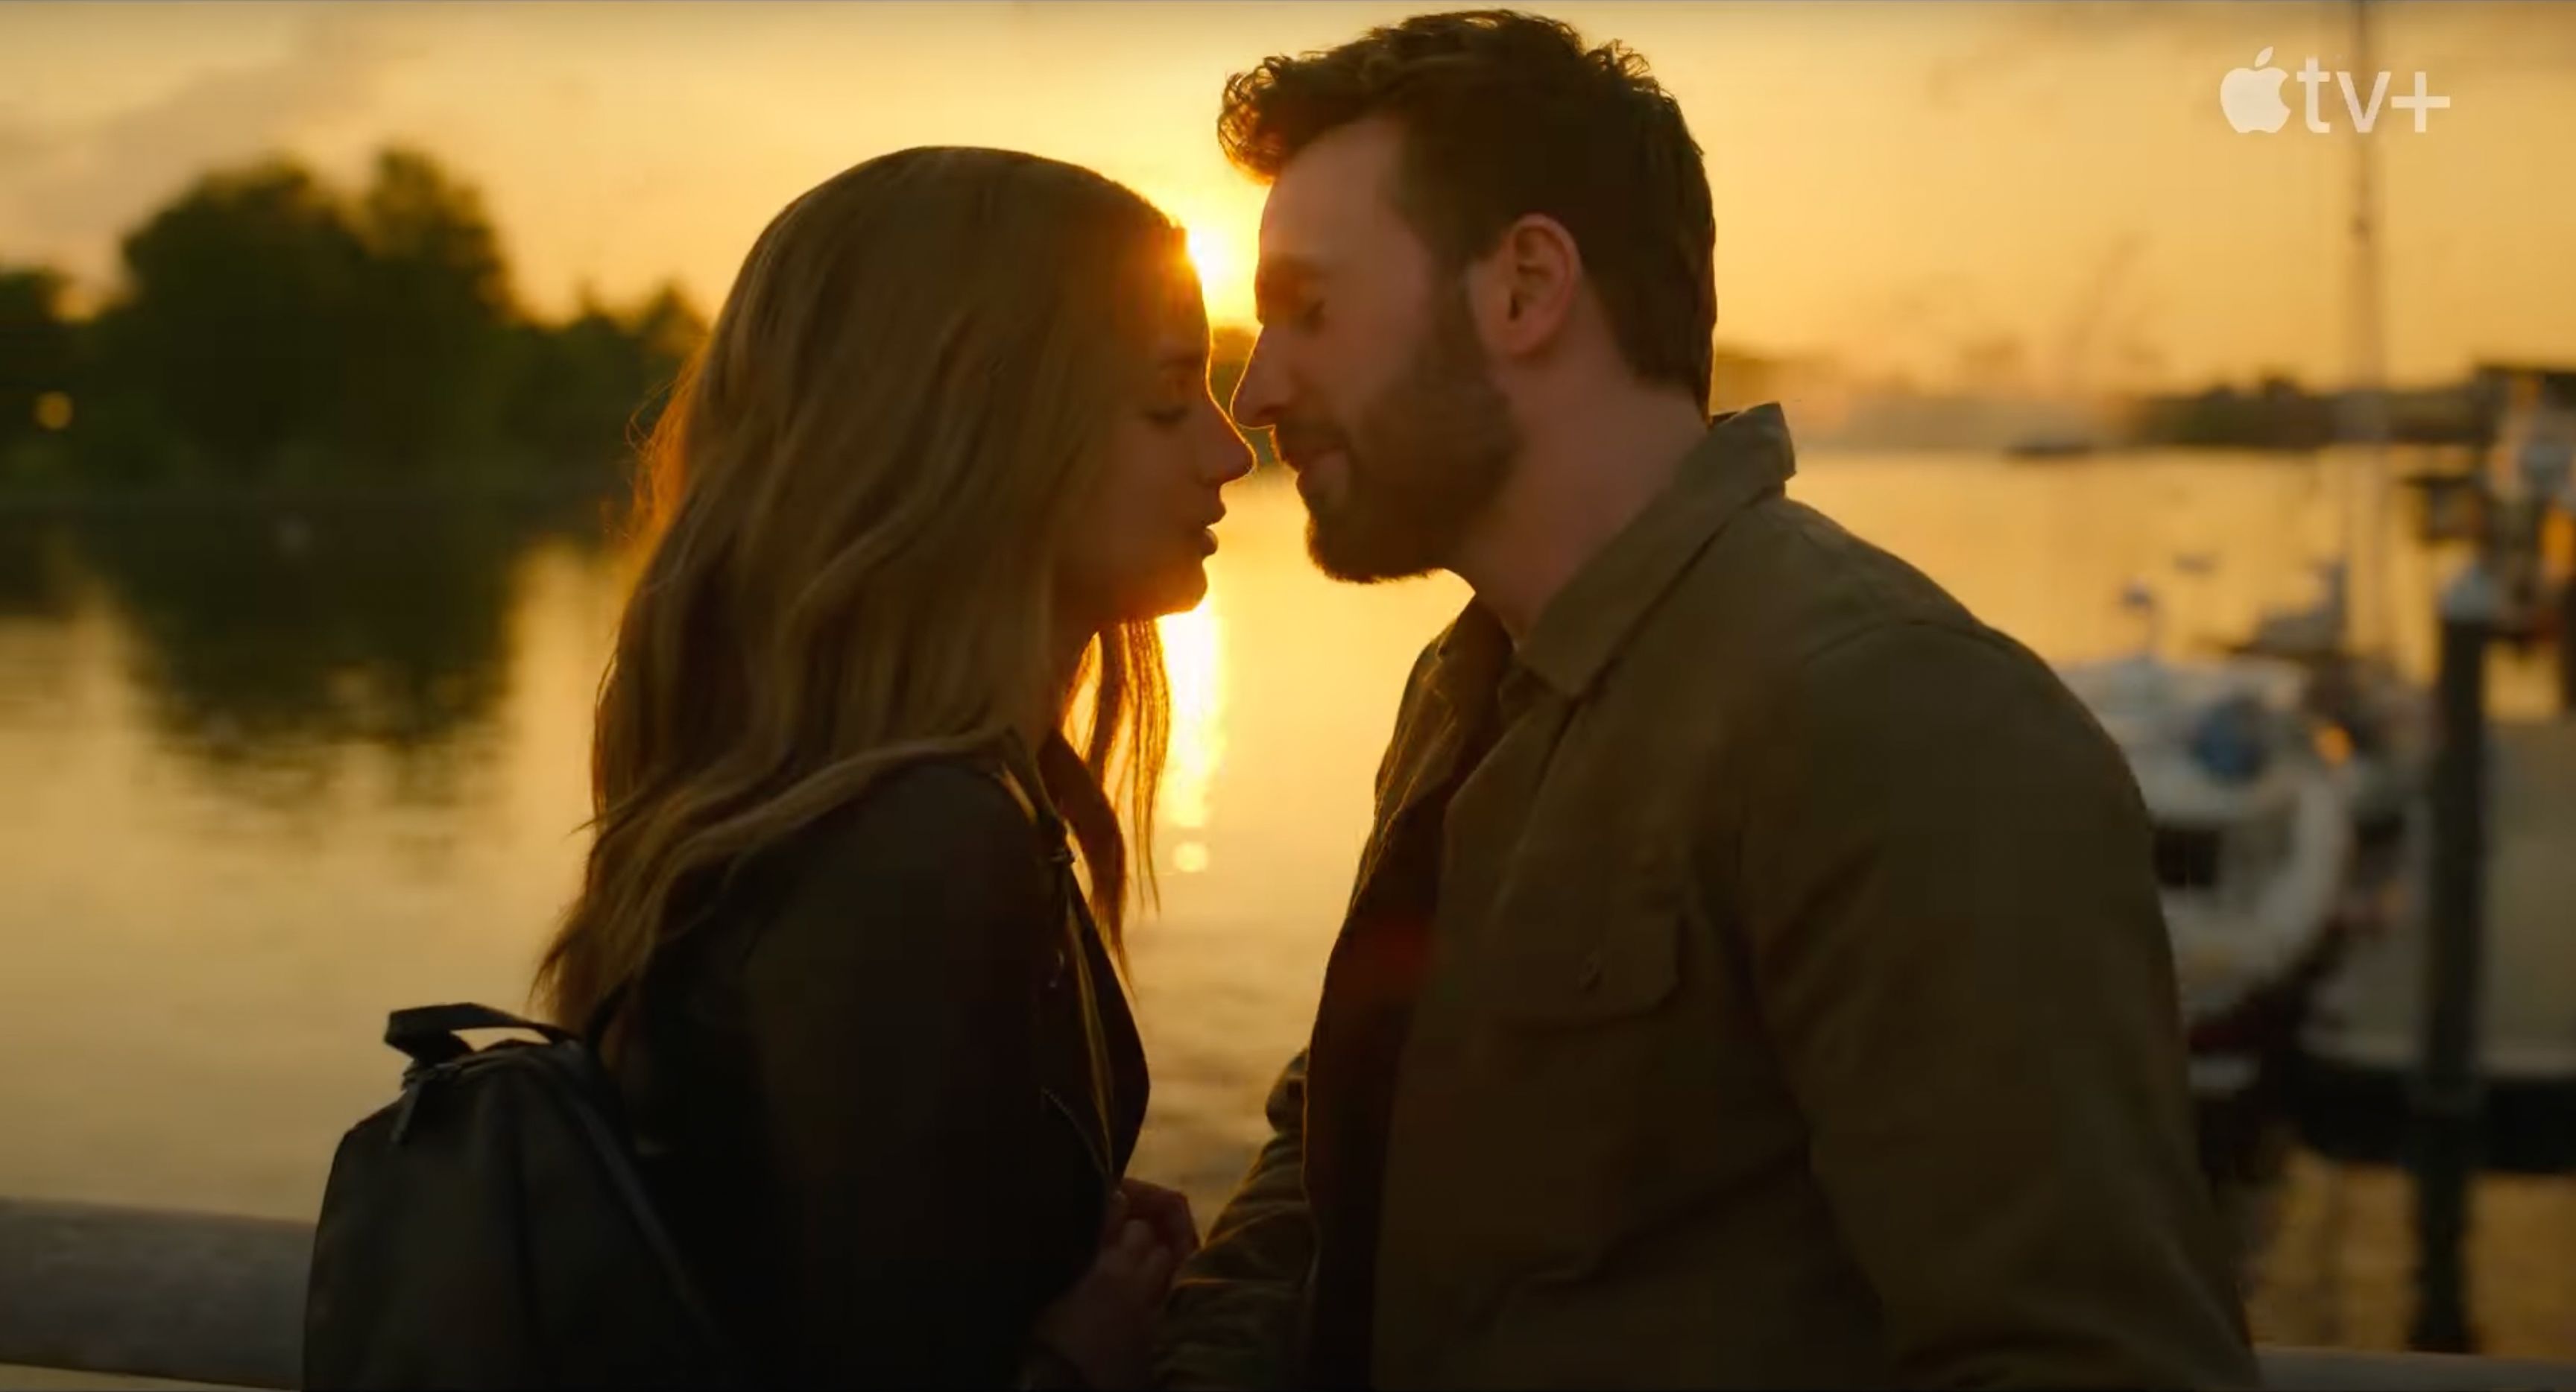 Ana de Armas rescues Chris Evans after romantic gesture goes awry in ' Ghosted' trailer